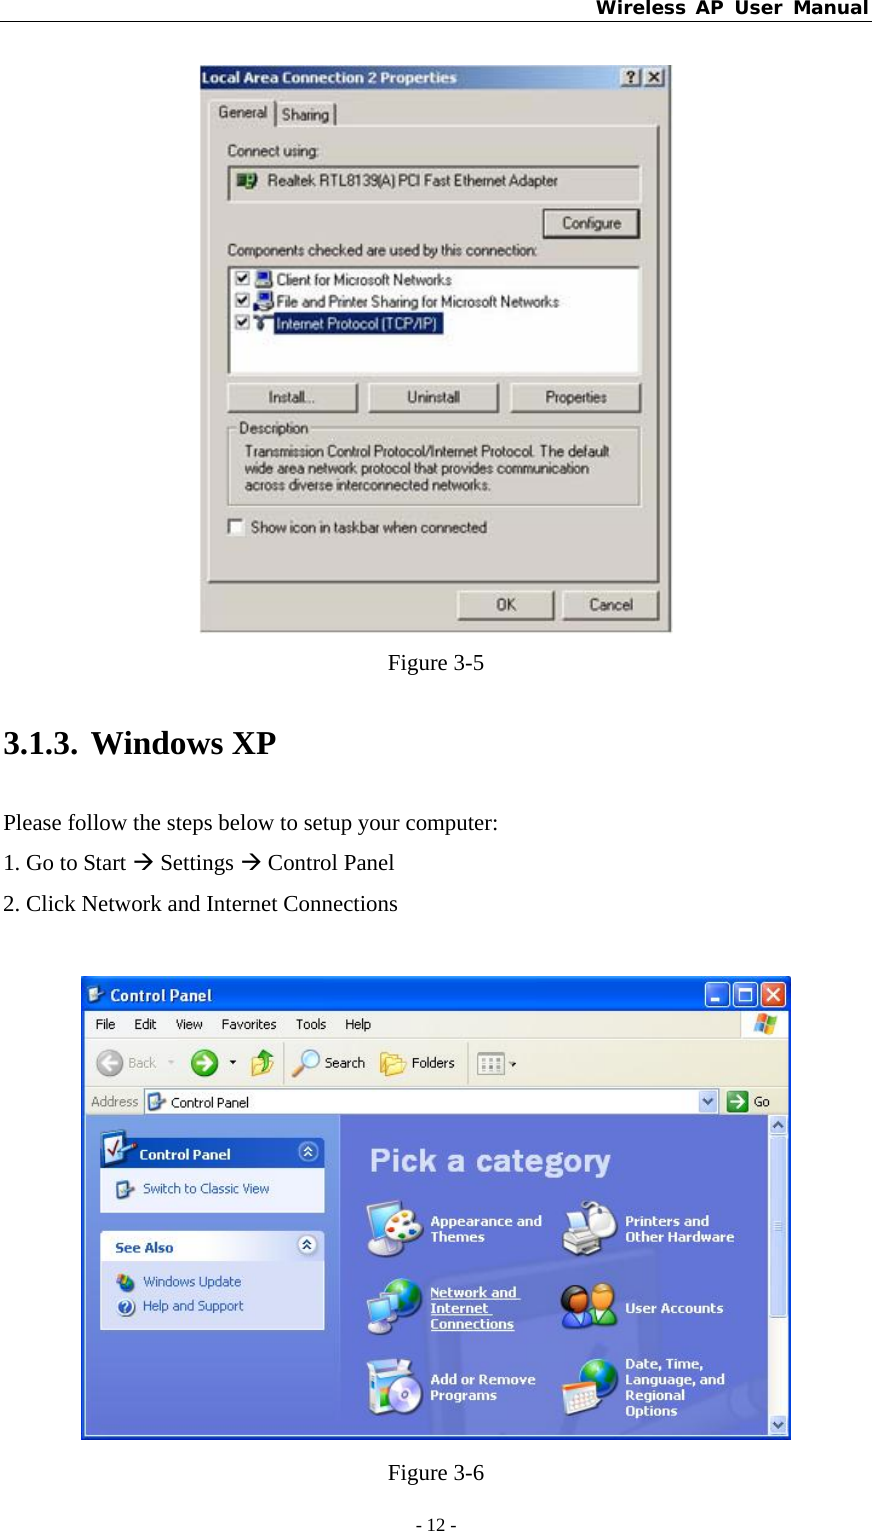 Wireless AP User Manual - 12 -   Figure 3-5 3.1.3. Windows XP Please follow the steps below to setup your computer: 1. Go to Start Æ Settings Æ Control Panel 2. Click Network and Internet Connections   Figure 3-6 